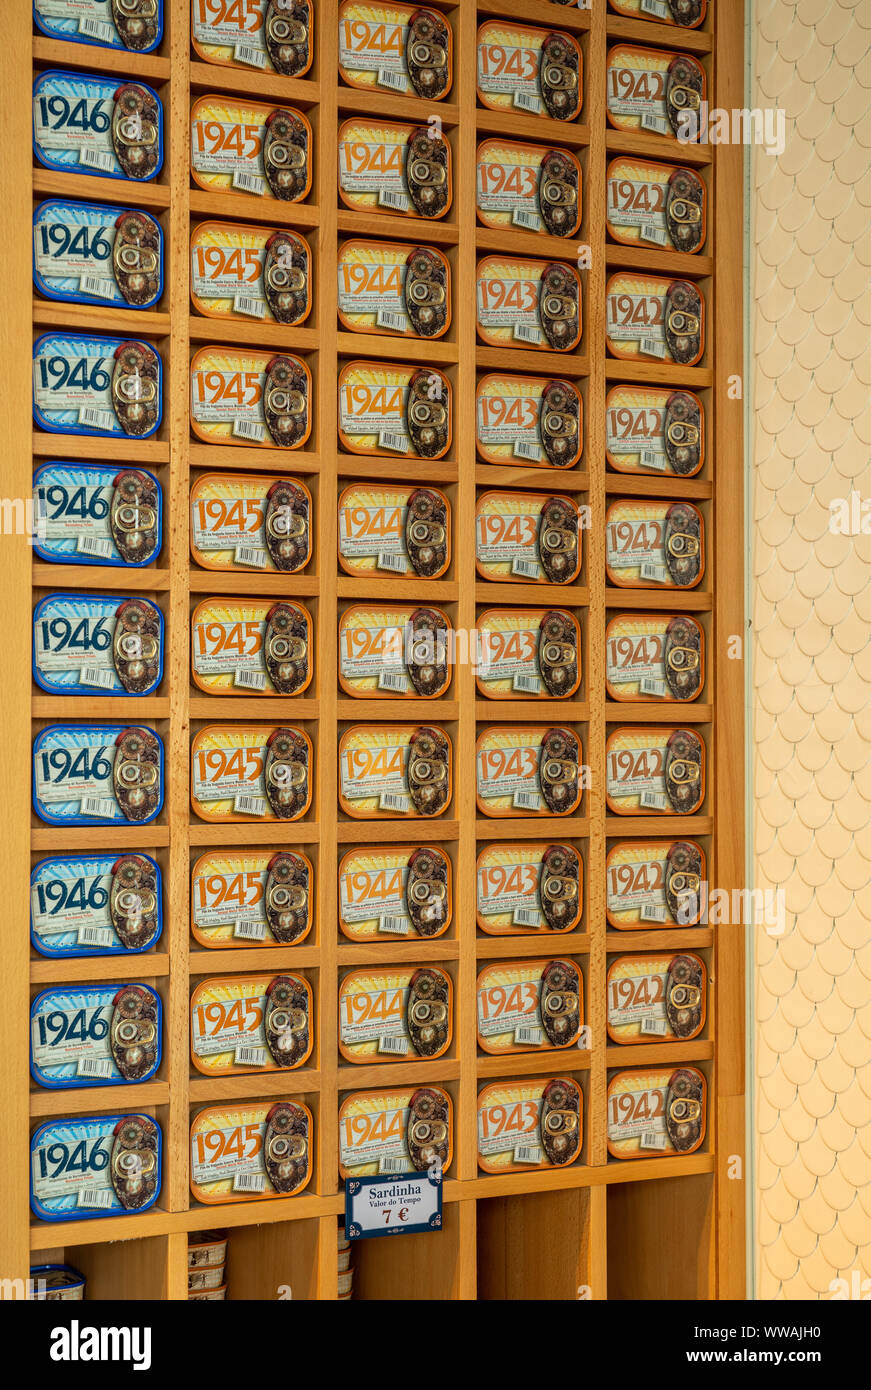 Stack of tinned sardines with dates in the 1940s in Comur shop Stock Photo